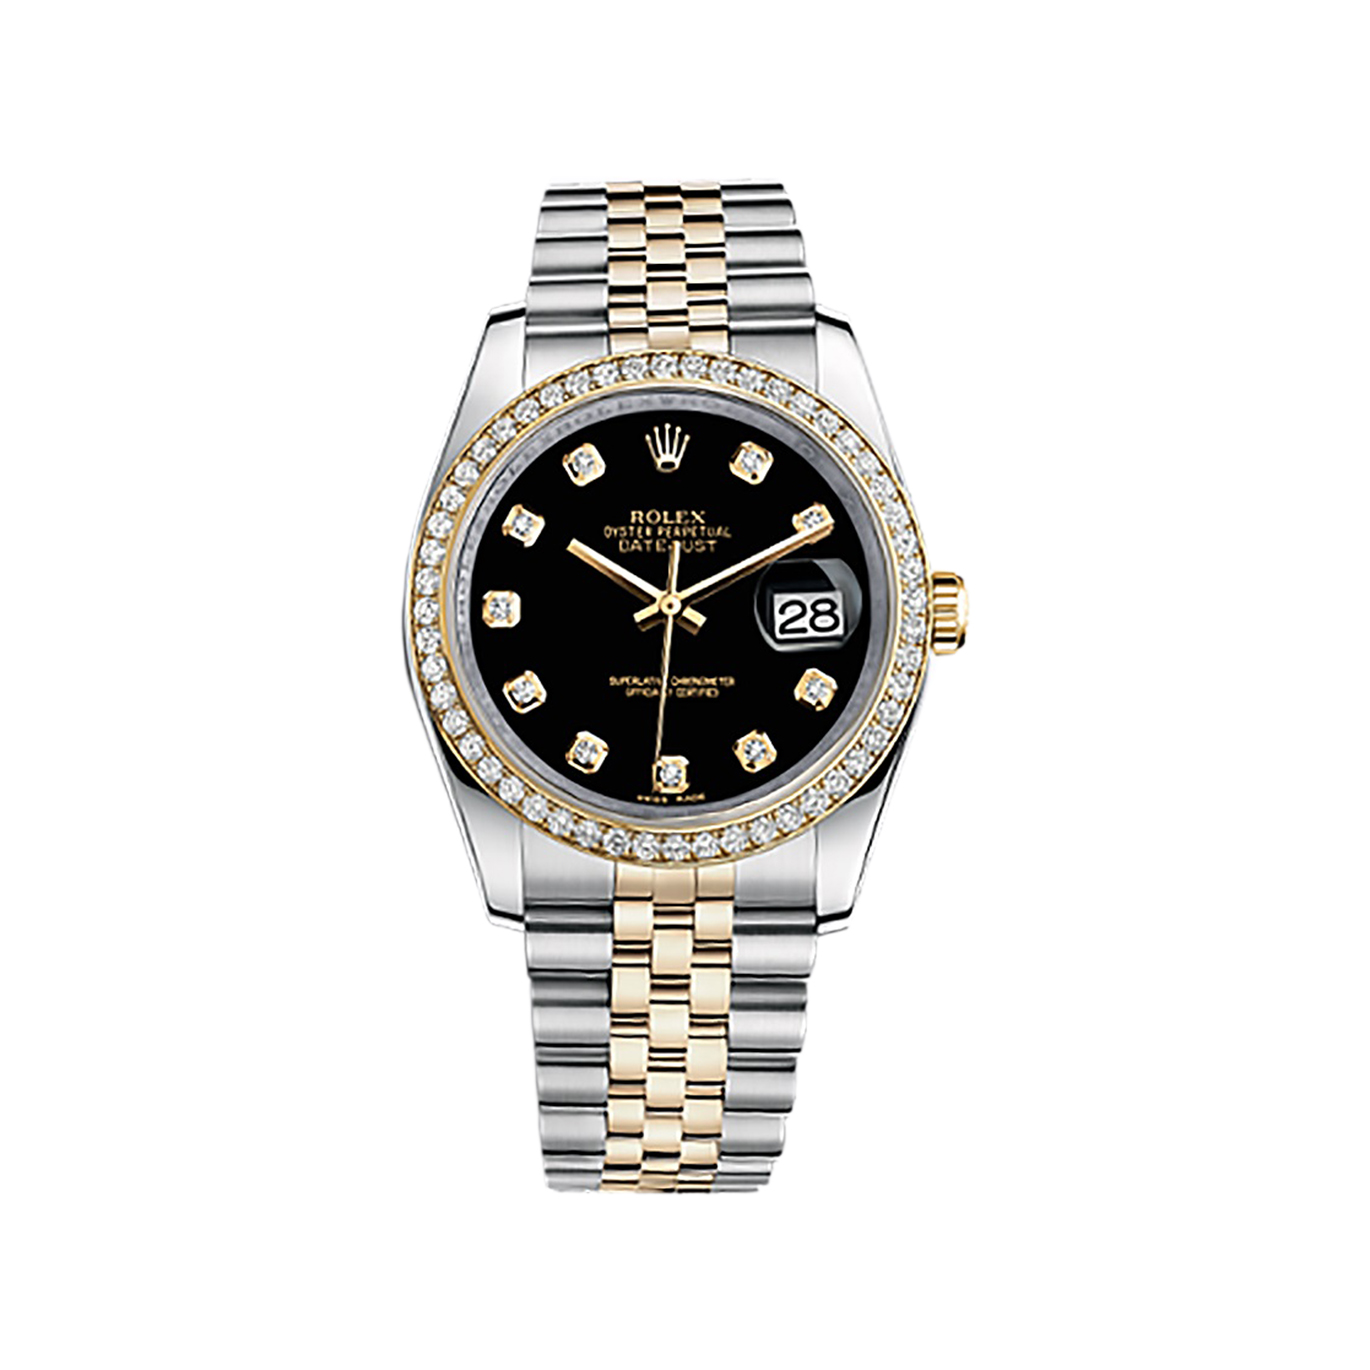 Datejust 36 116243 Gold & Stainless Steel Watch (Black Set with Diamonds)